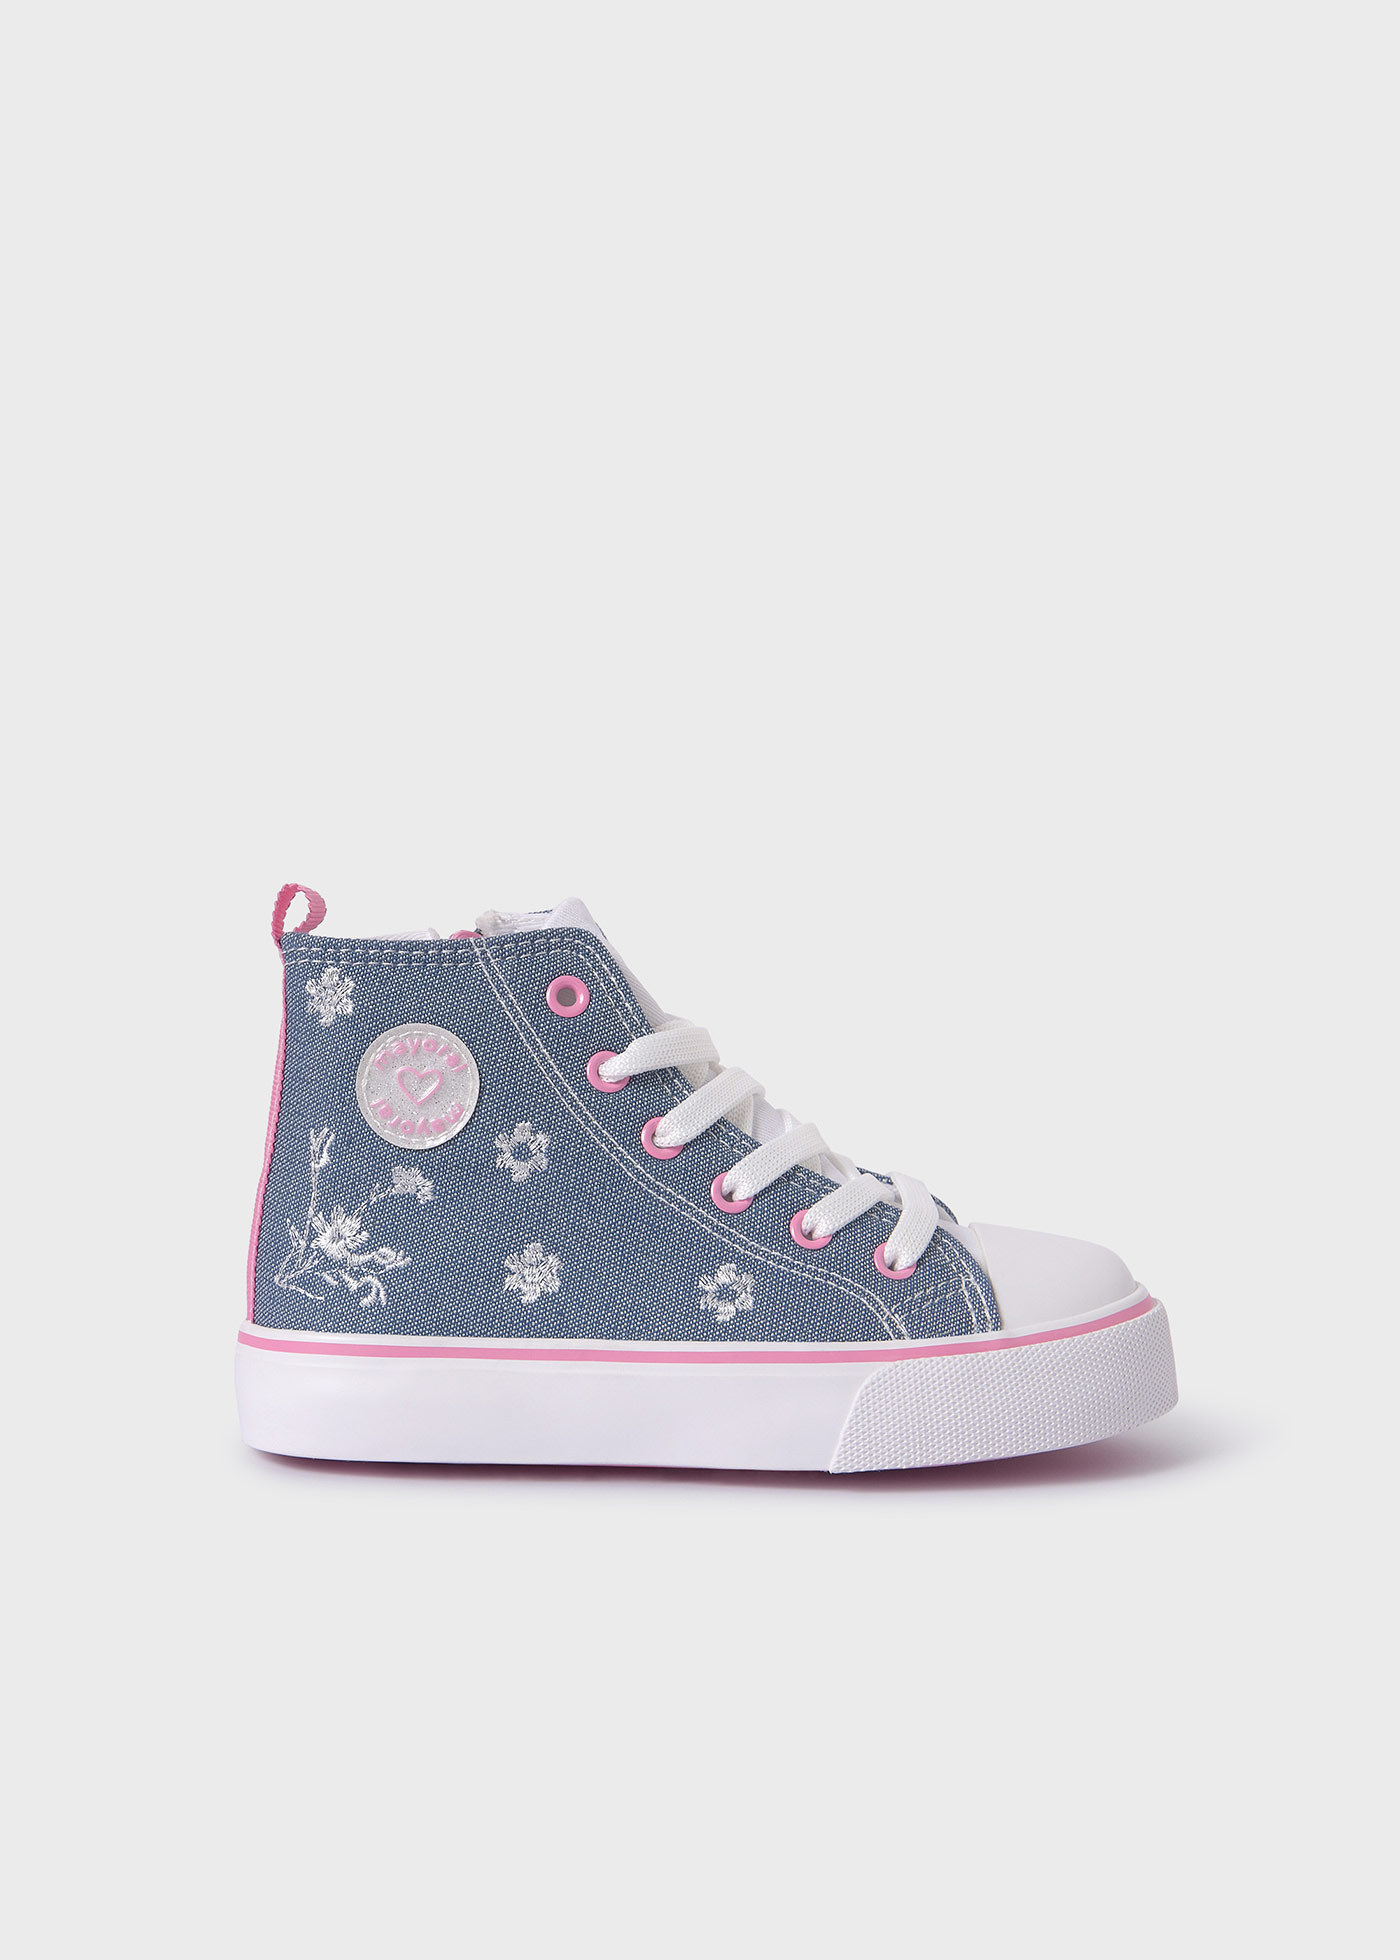 Girls embroidery sneakers